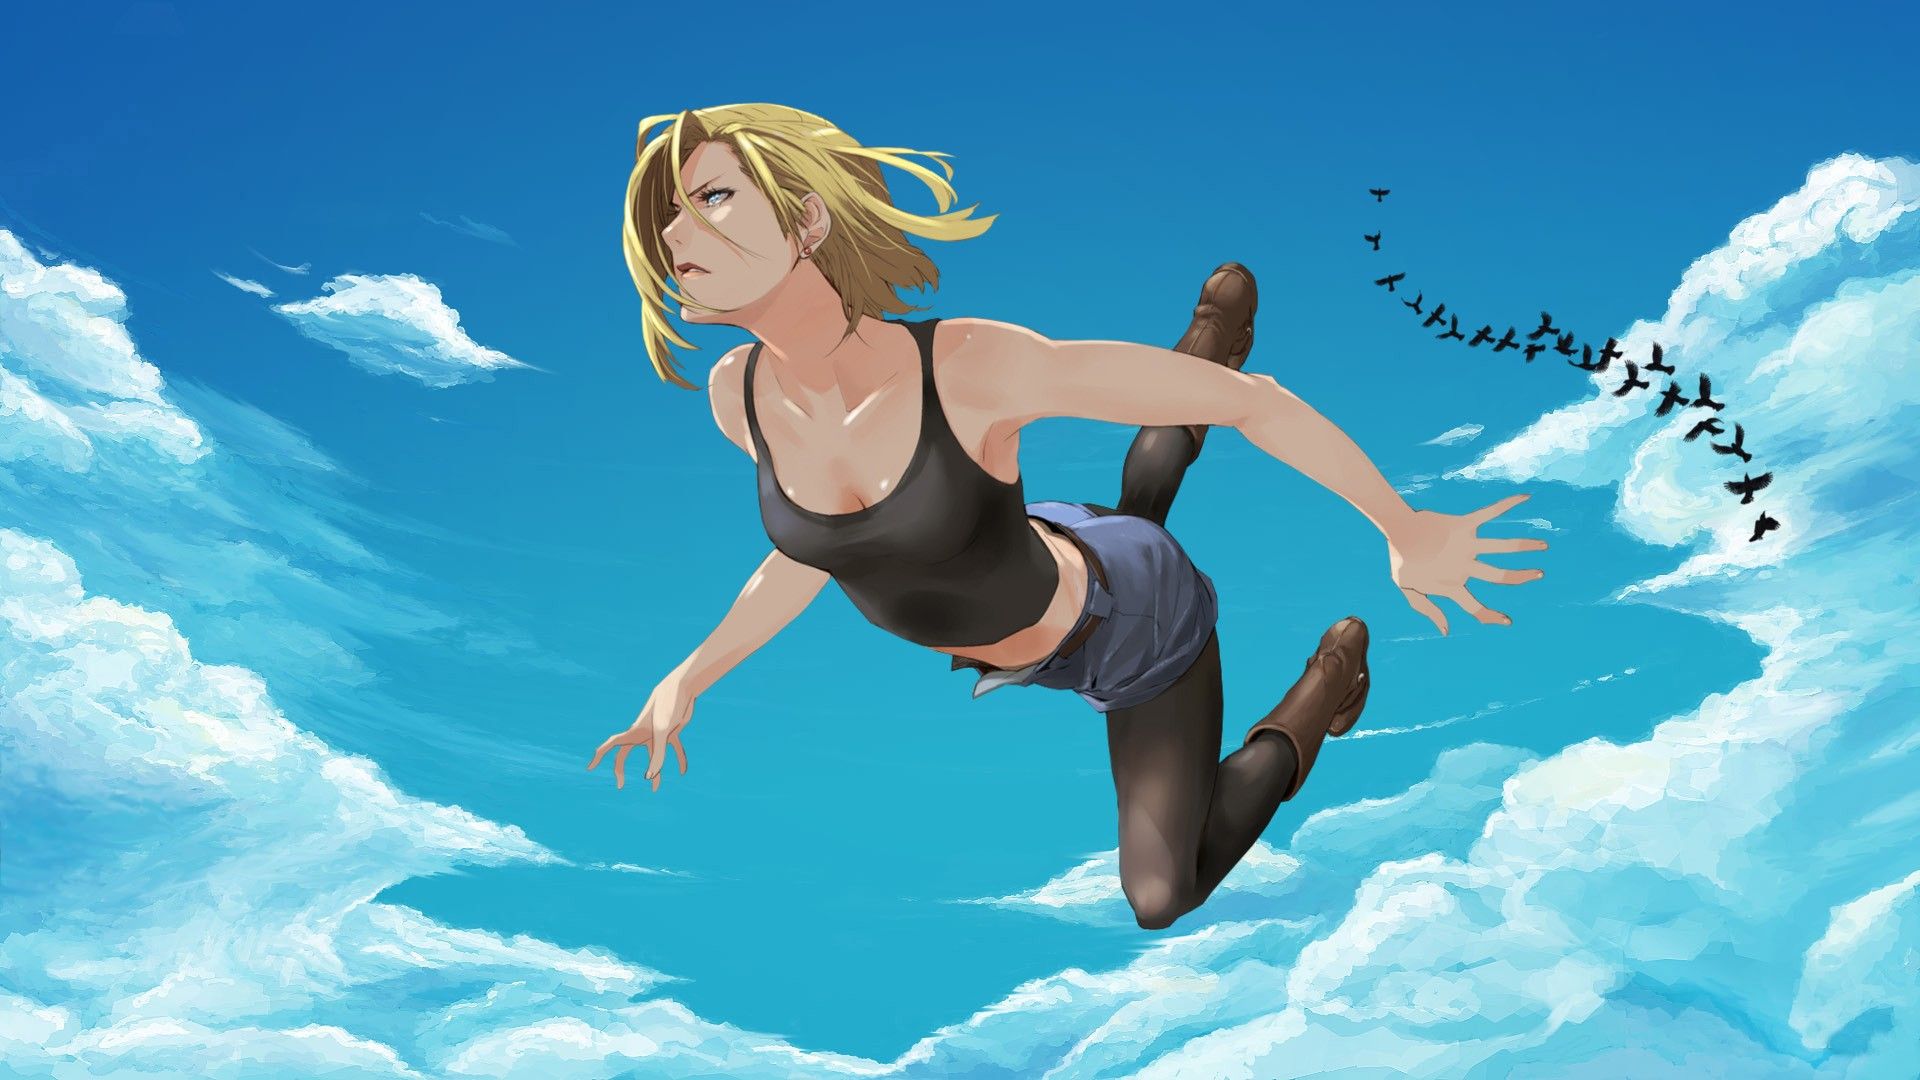 Android 18 - 1920x1080 Wallpaper